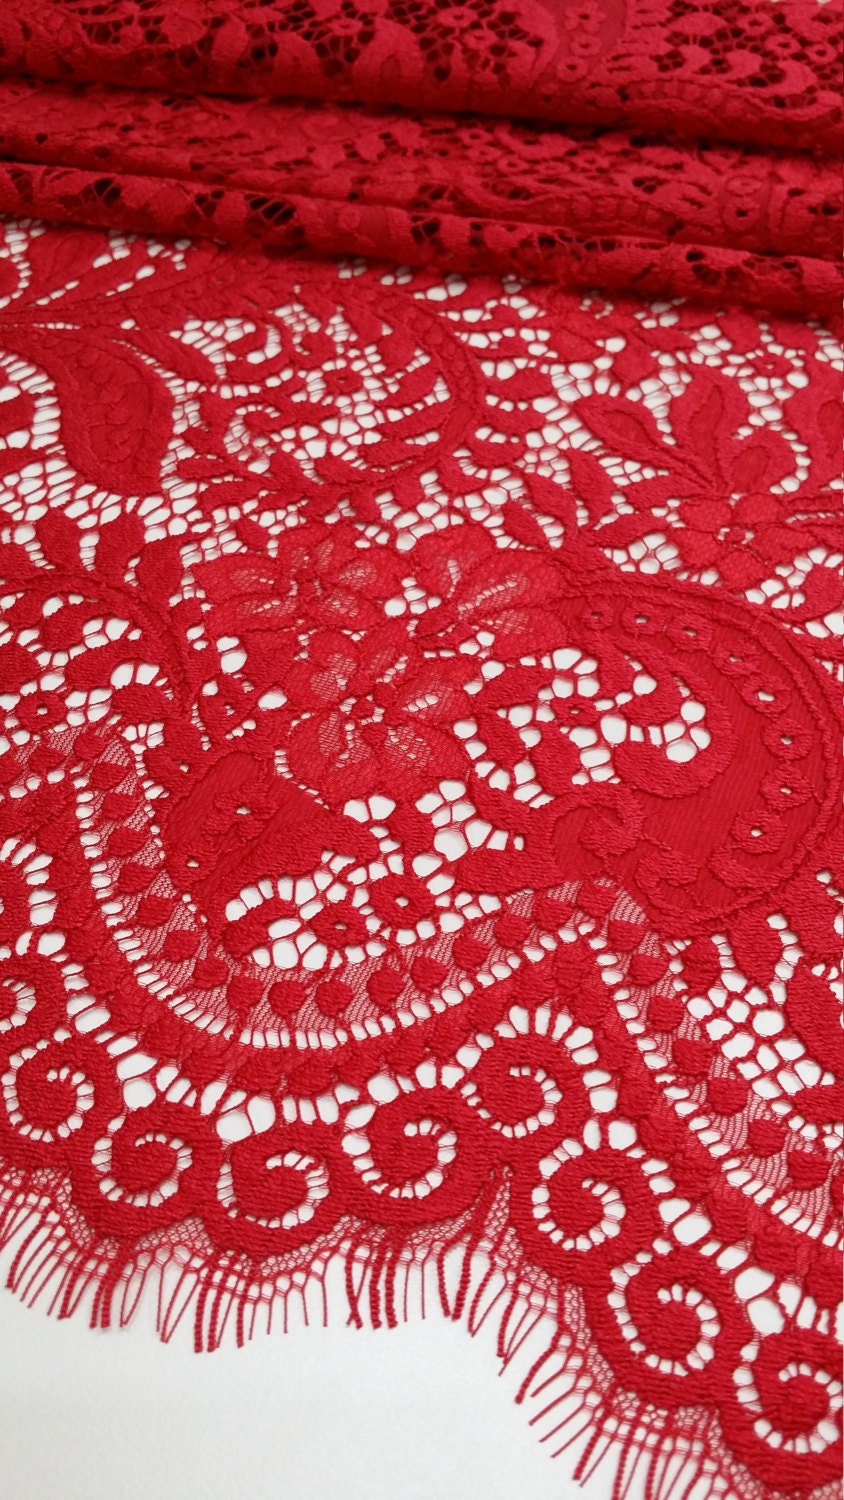 Red Lace Fabric Chantilly Lace French Lace Bridal Lace - Etsy